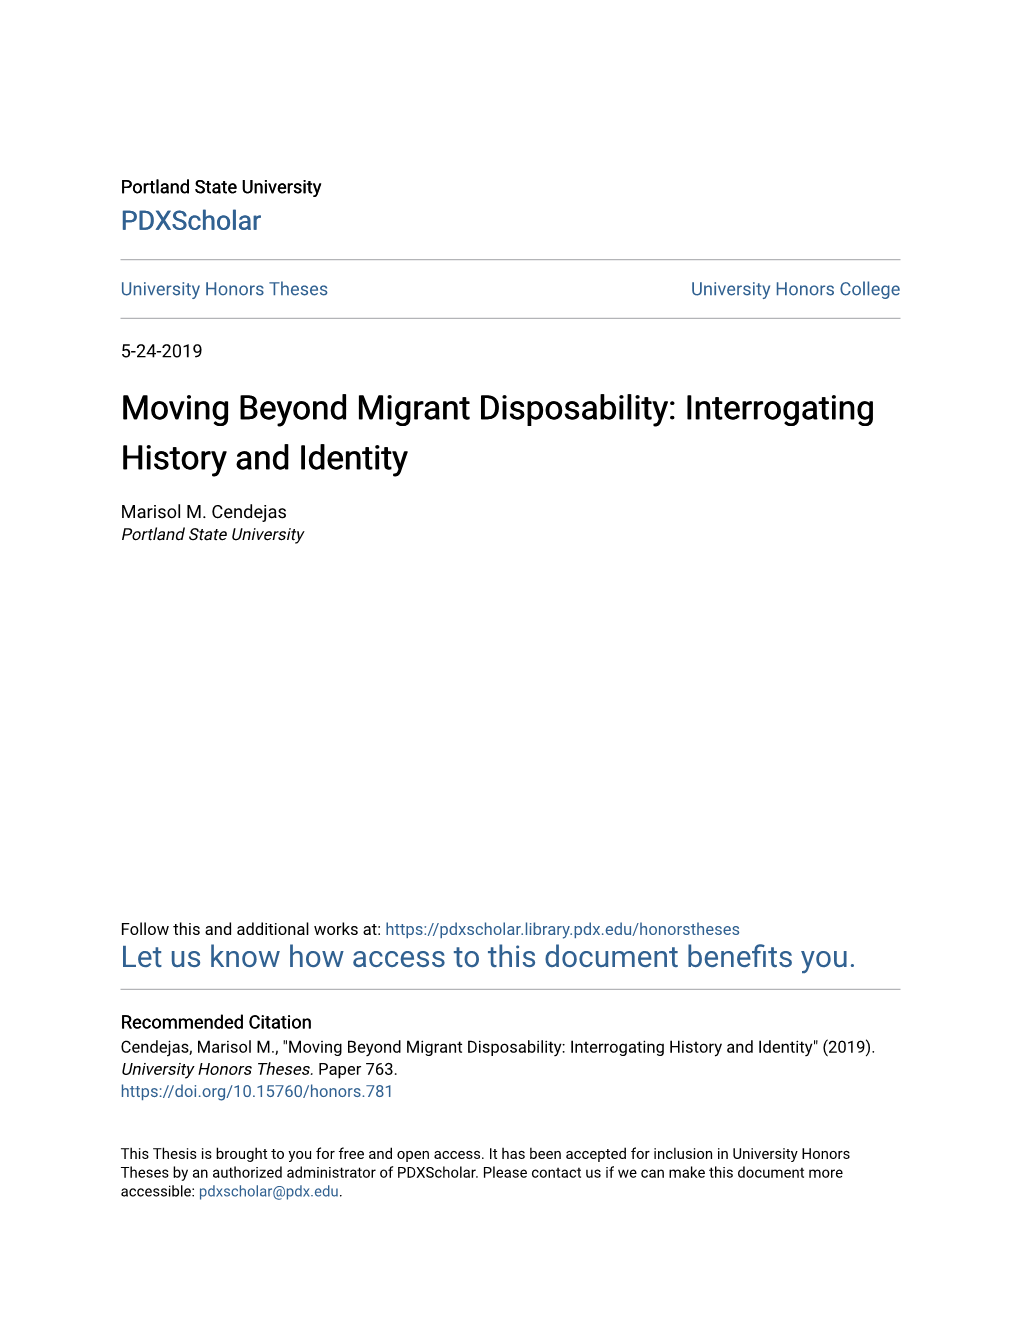 Moving Beyond Migrant Disposability: Interrogating History and Identity